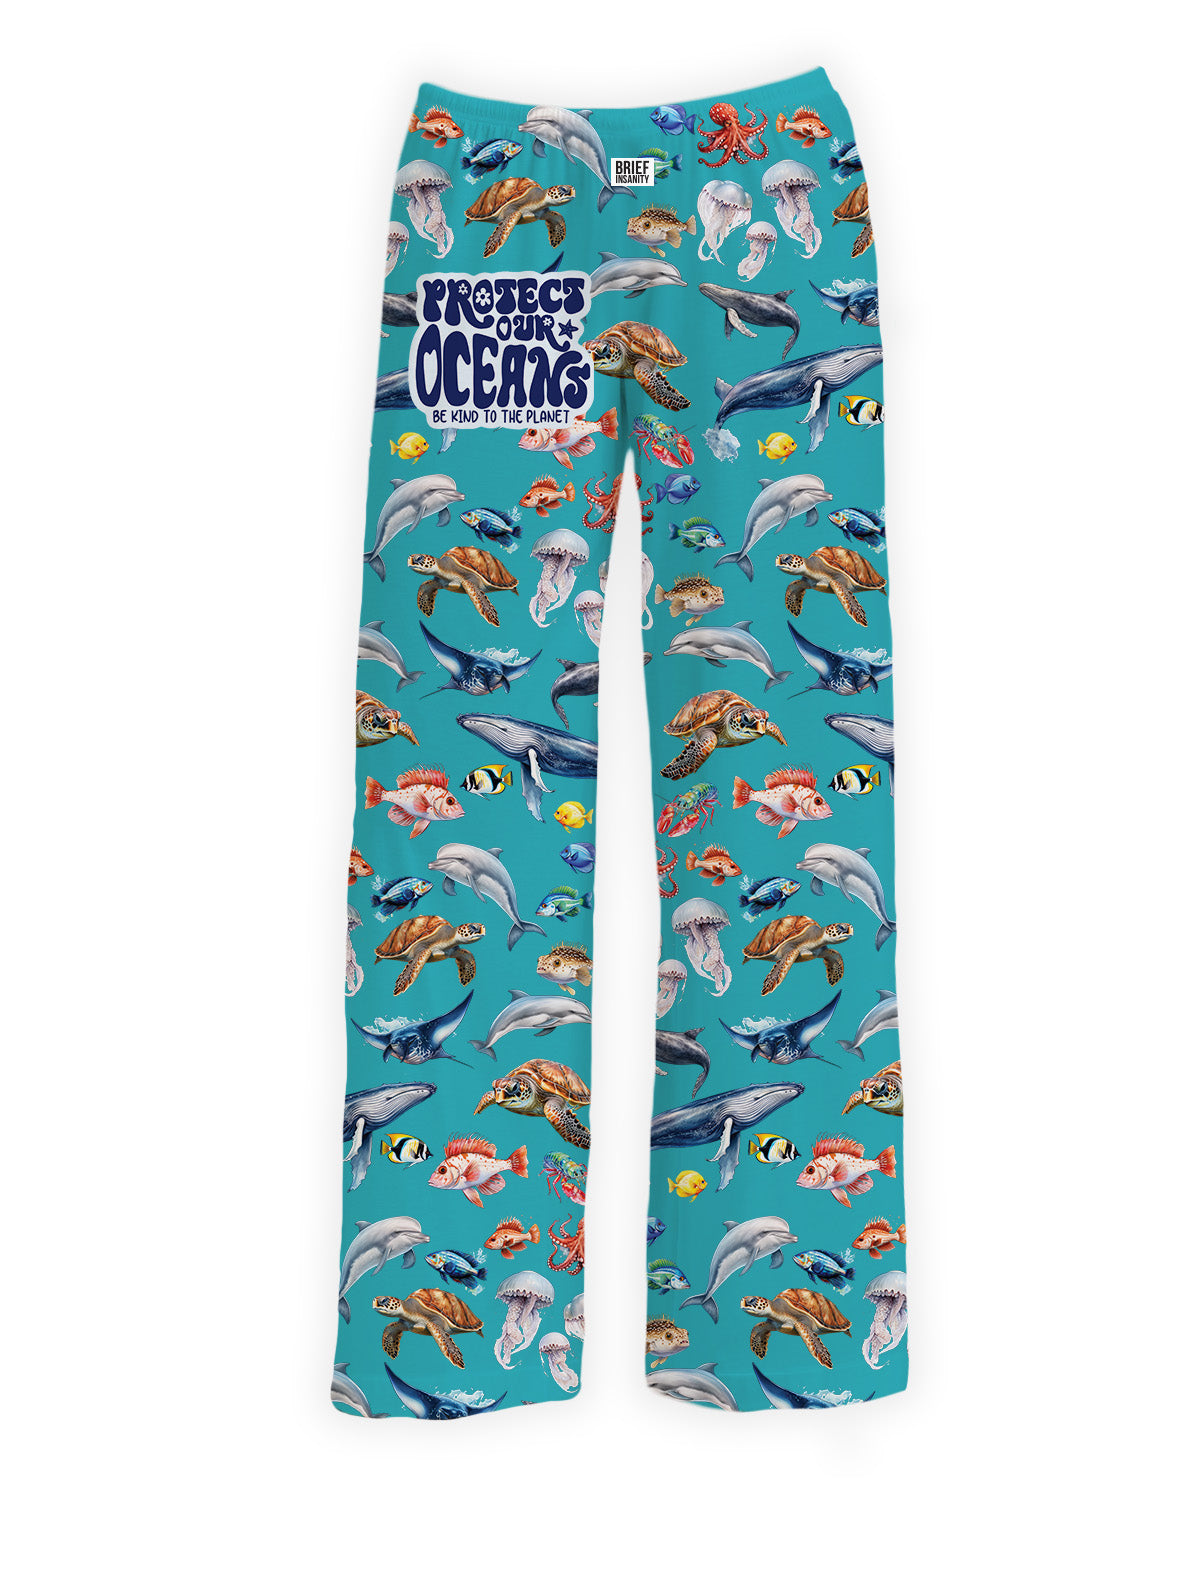 Protect Our Oceans Pajama Lounge Pants | Brief Insanity Large